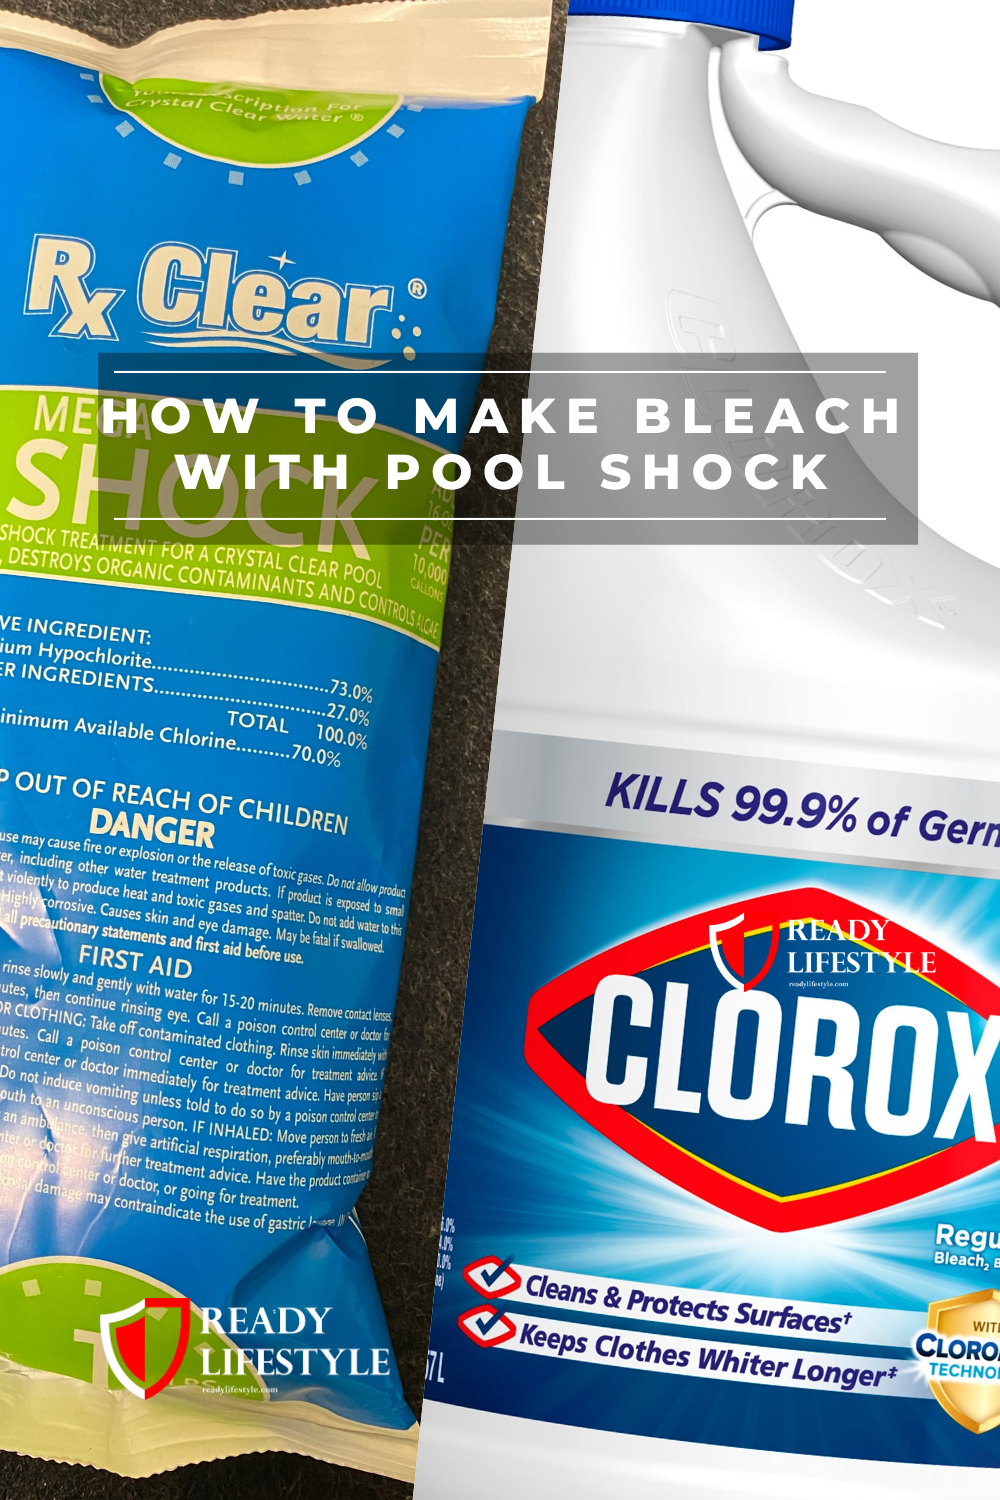 Can I Use Bleach In My Pool Instead Of Shock